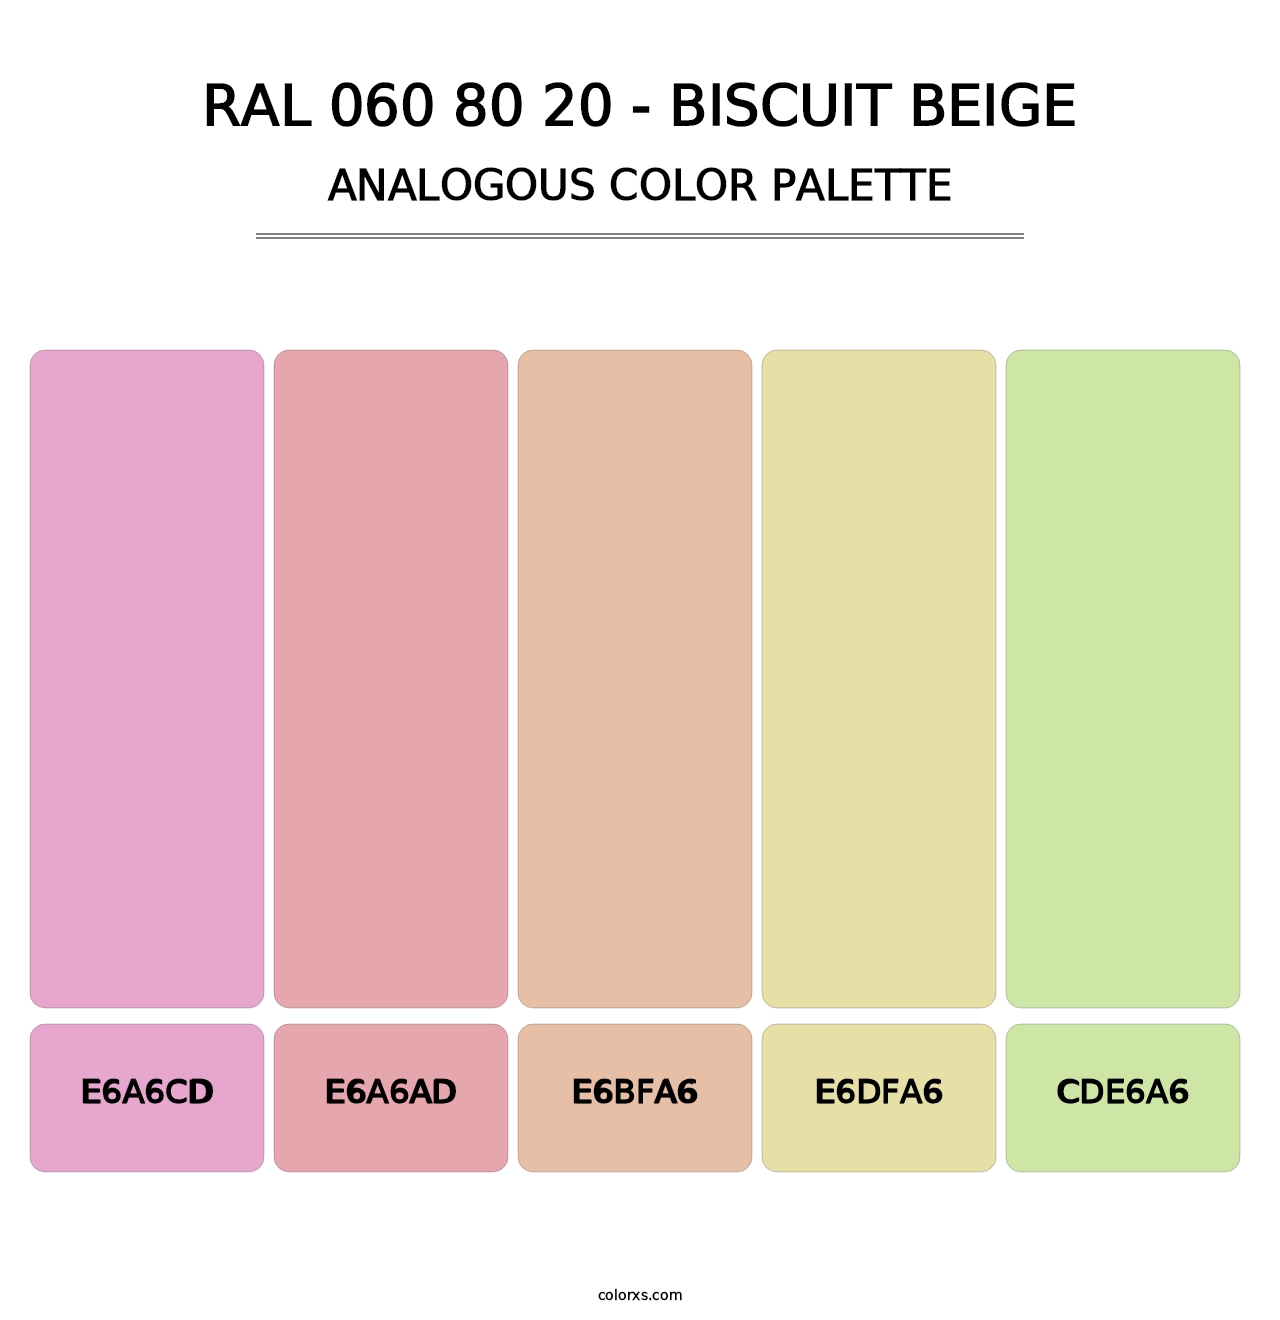 RAL 060 80 20 - Biscuit Beige - Analogous Color Palette